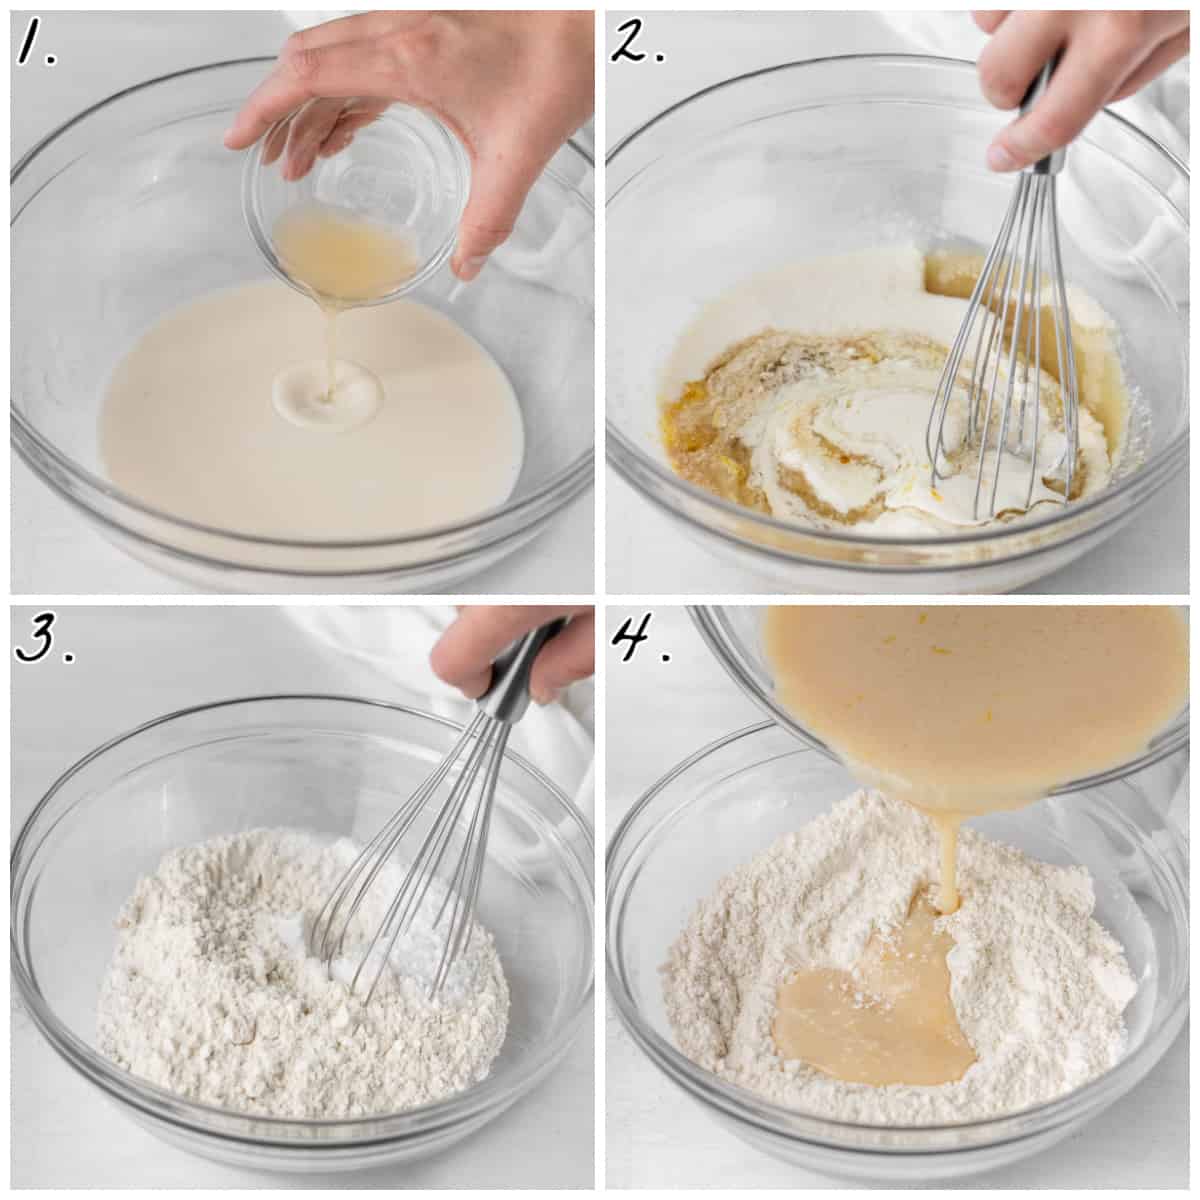 Four process photos showing how to make the muffin batter. 